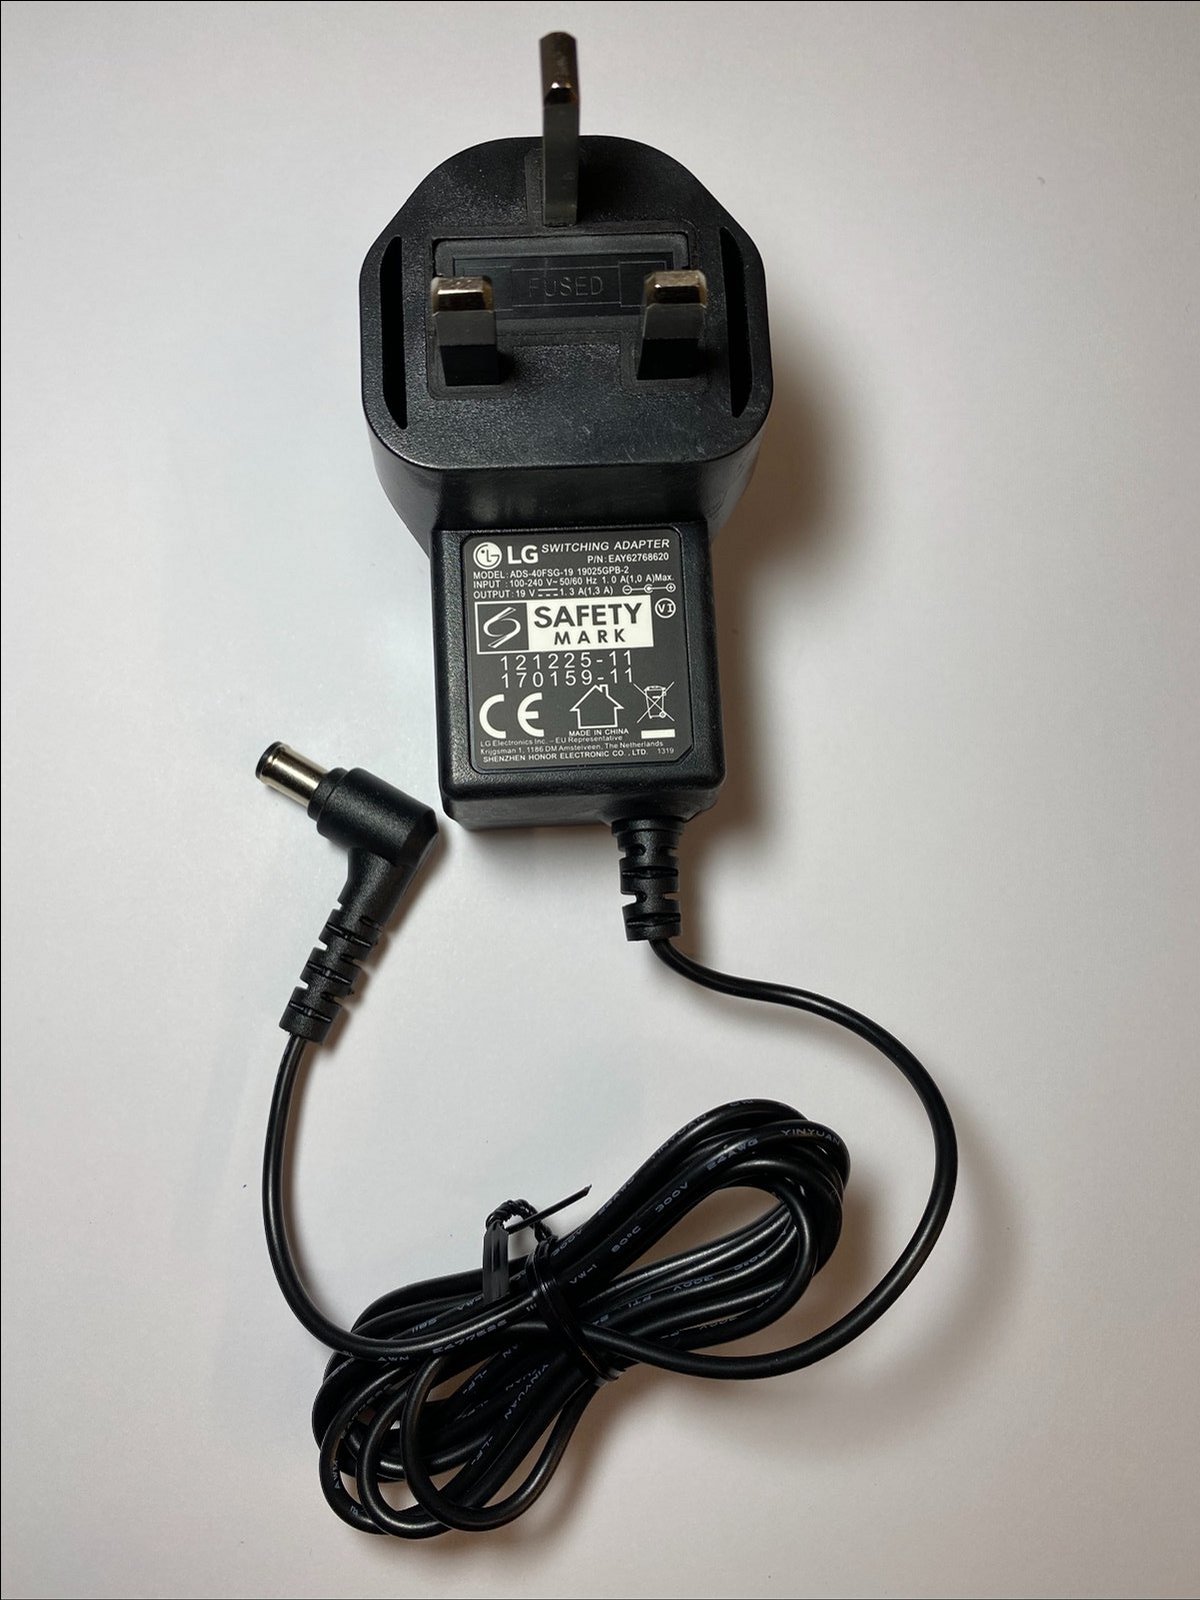 UK 19V 1.2A Replacement AC Adaptor Power Supply for LG Flatron E2342 Monitor